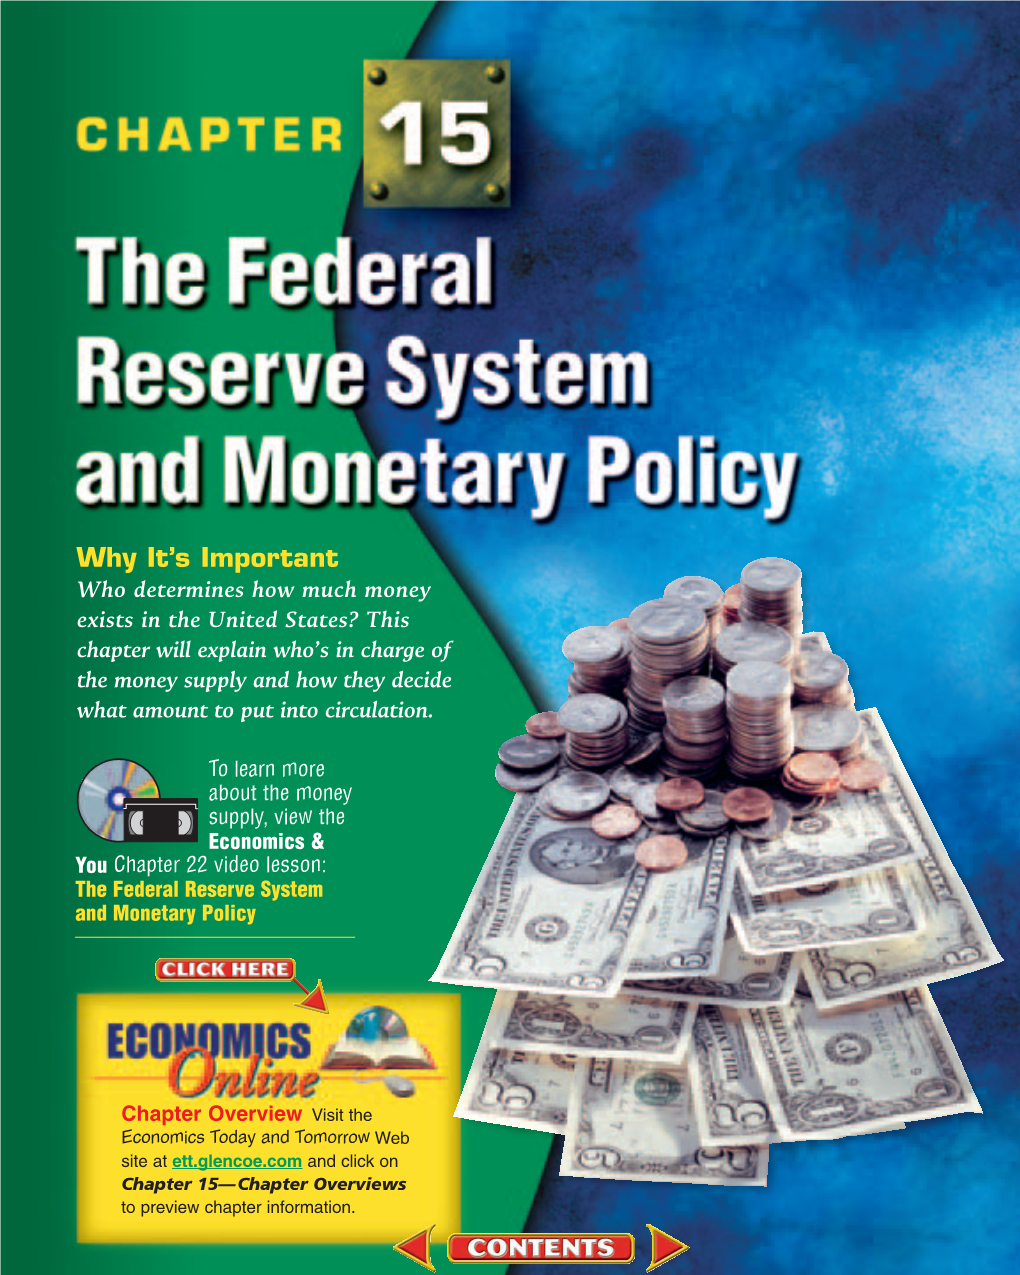 Chapter 15: the Federal Reserve System and Monetary Policy